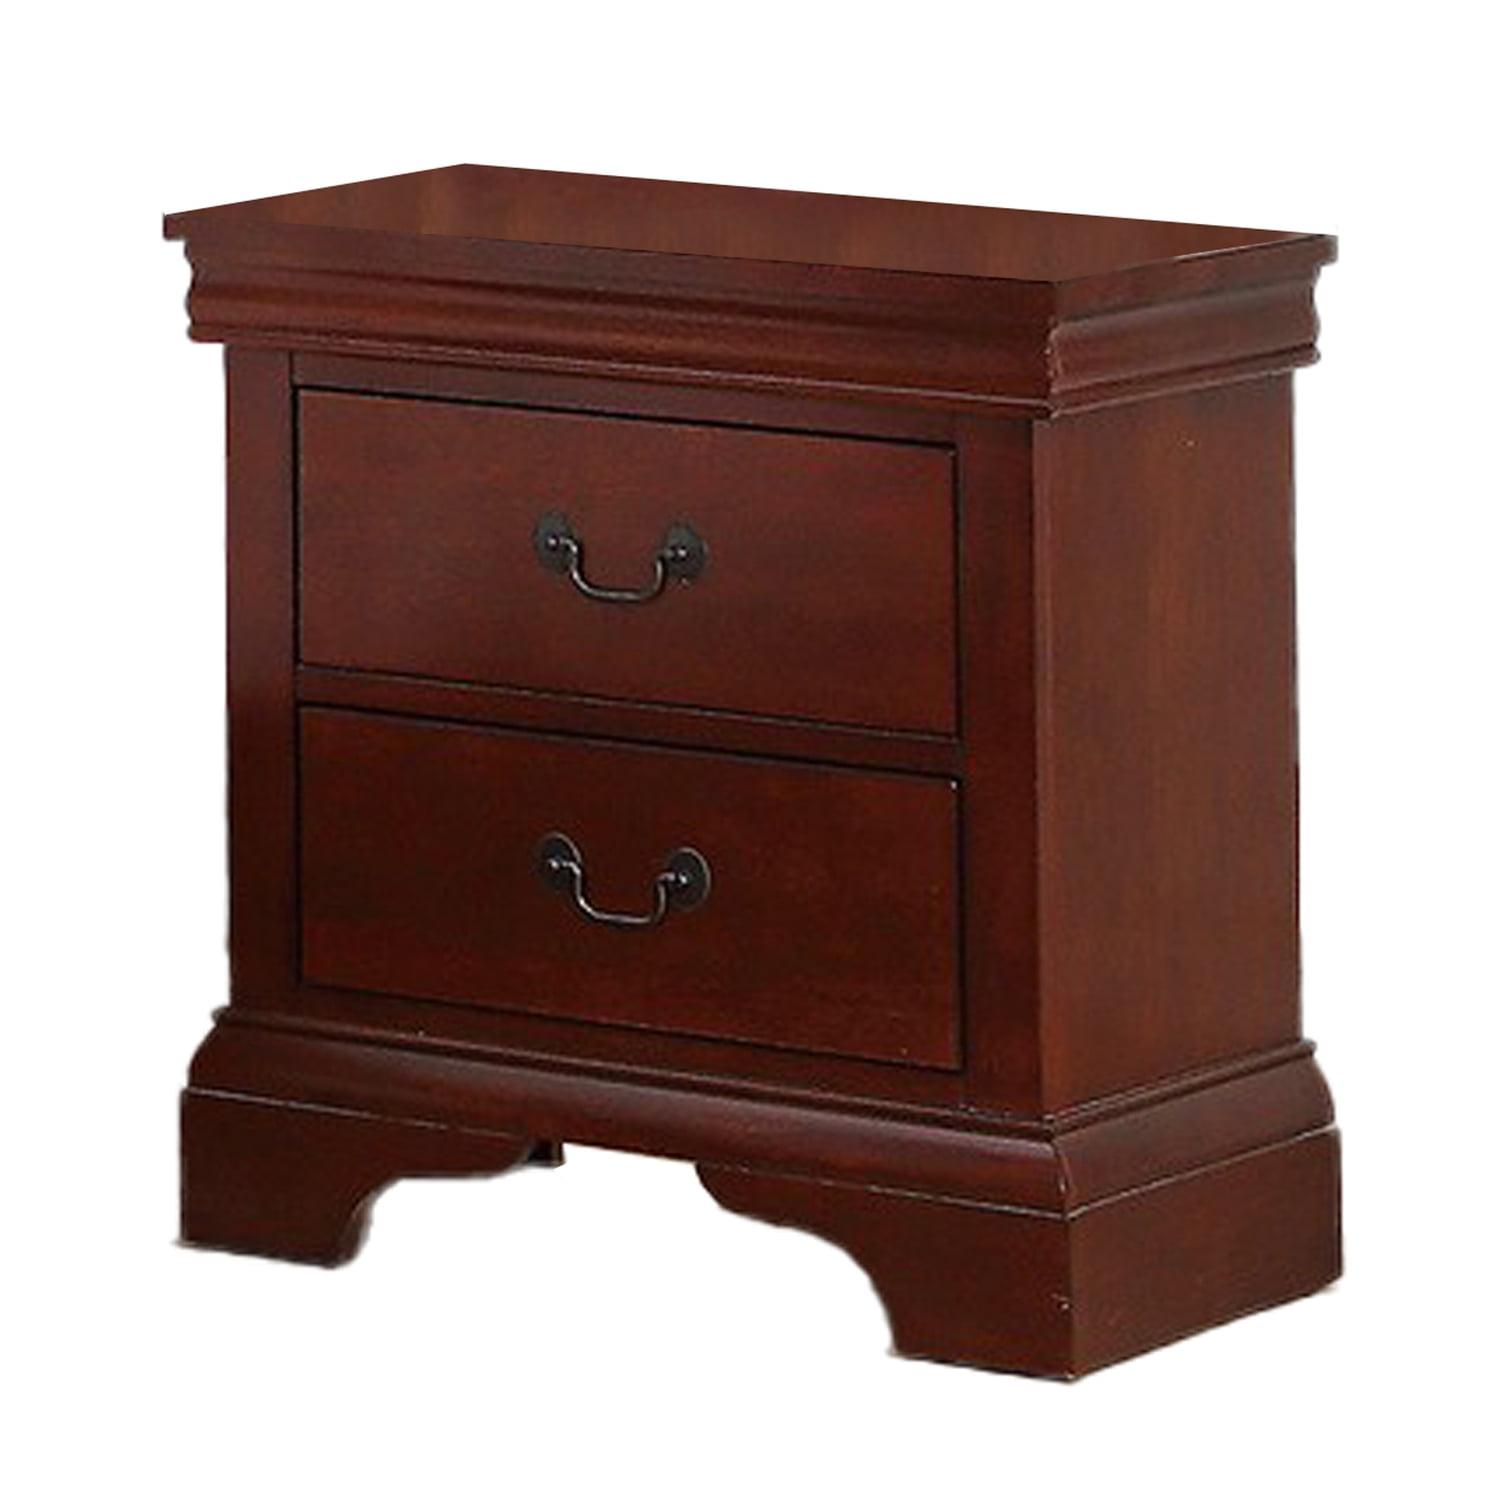 Cherry Brown Solid Wood 2-Drawer Nightstand with Metal Accents